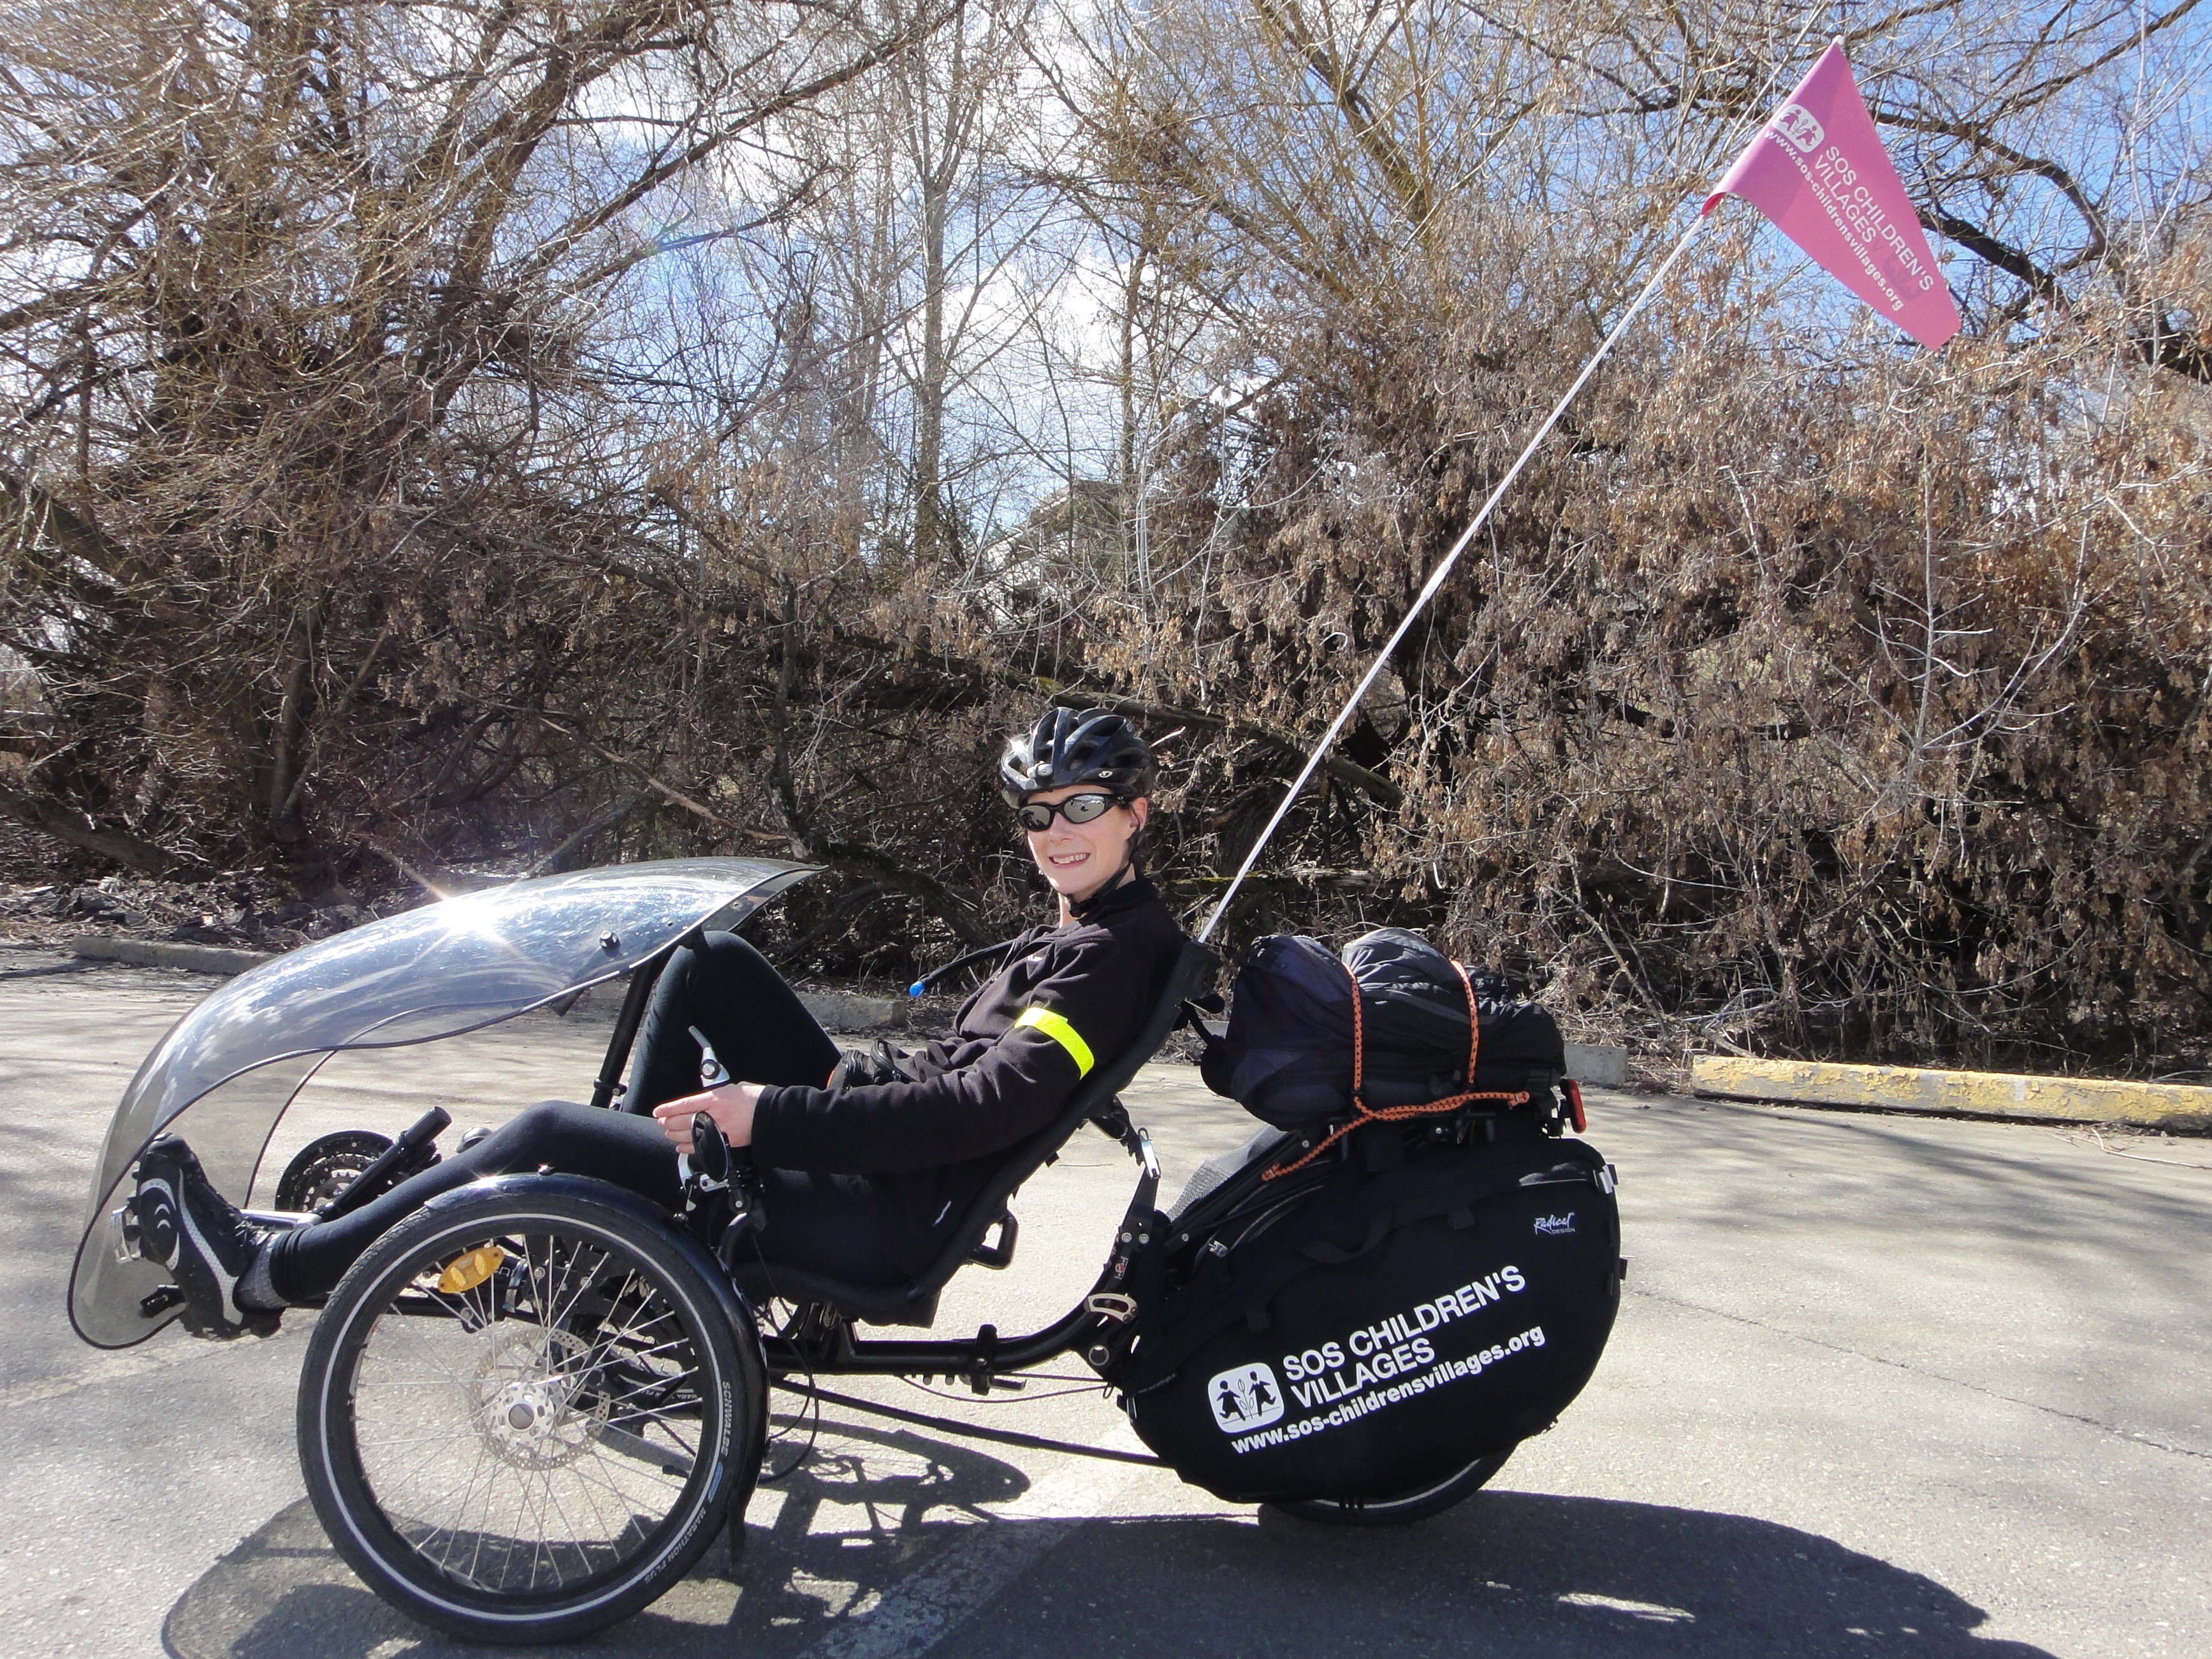 MEANINGFUL JOURNEY – Tana Silverland poses on her recumbent tricycle which she is riding across the country in hopes of raising awareness for SOS Children’s Villages